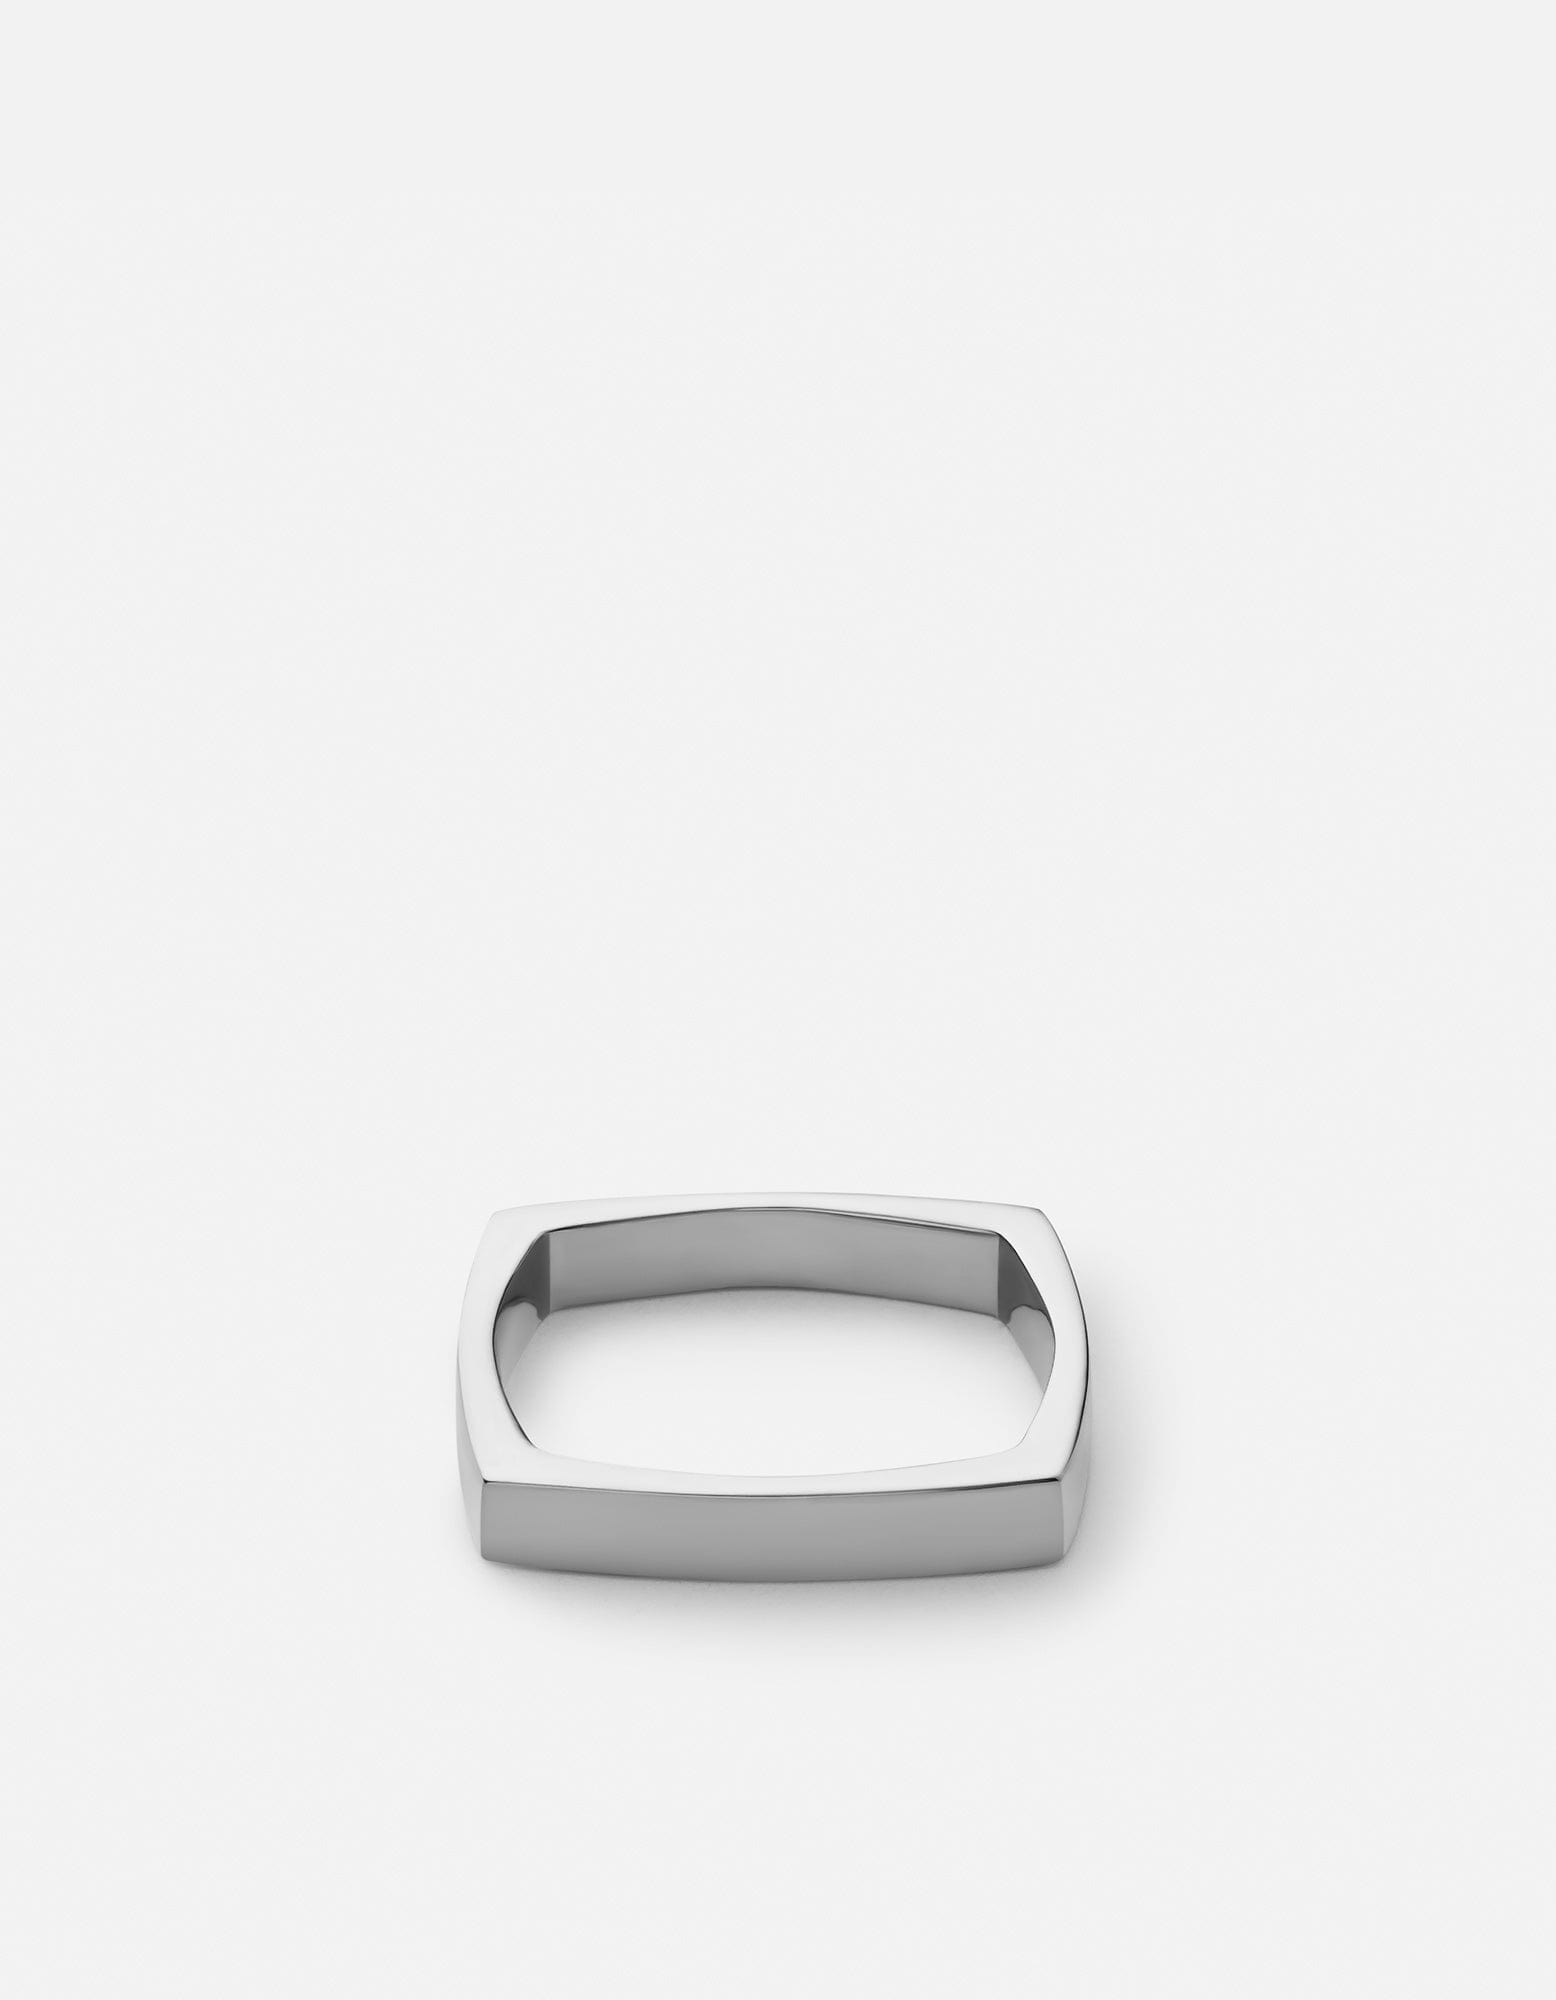 Rings | 925 Pure Silver Ring (With Hallmark) | Freeup